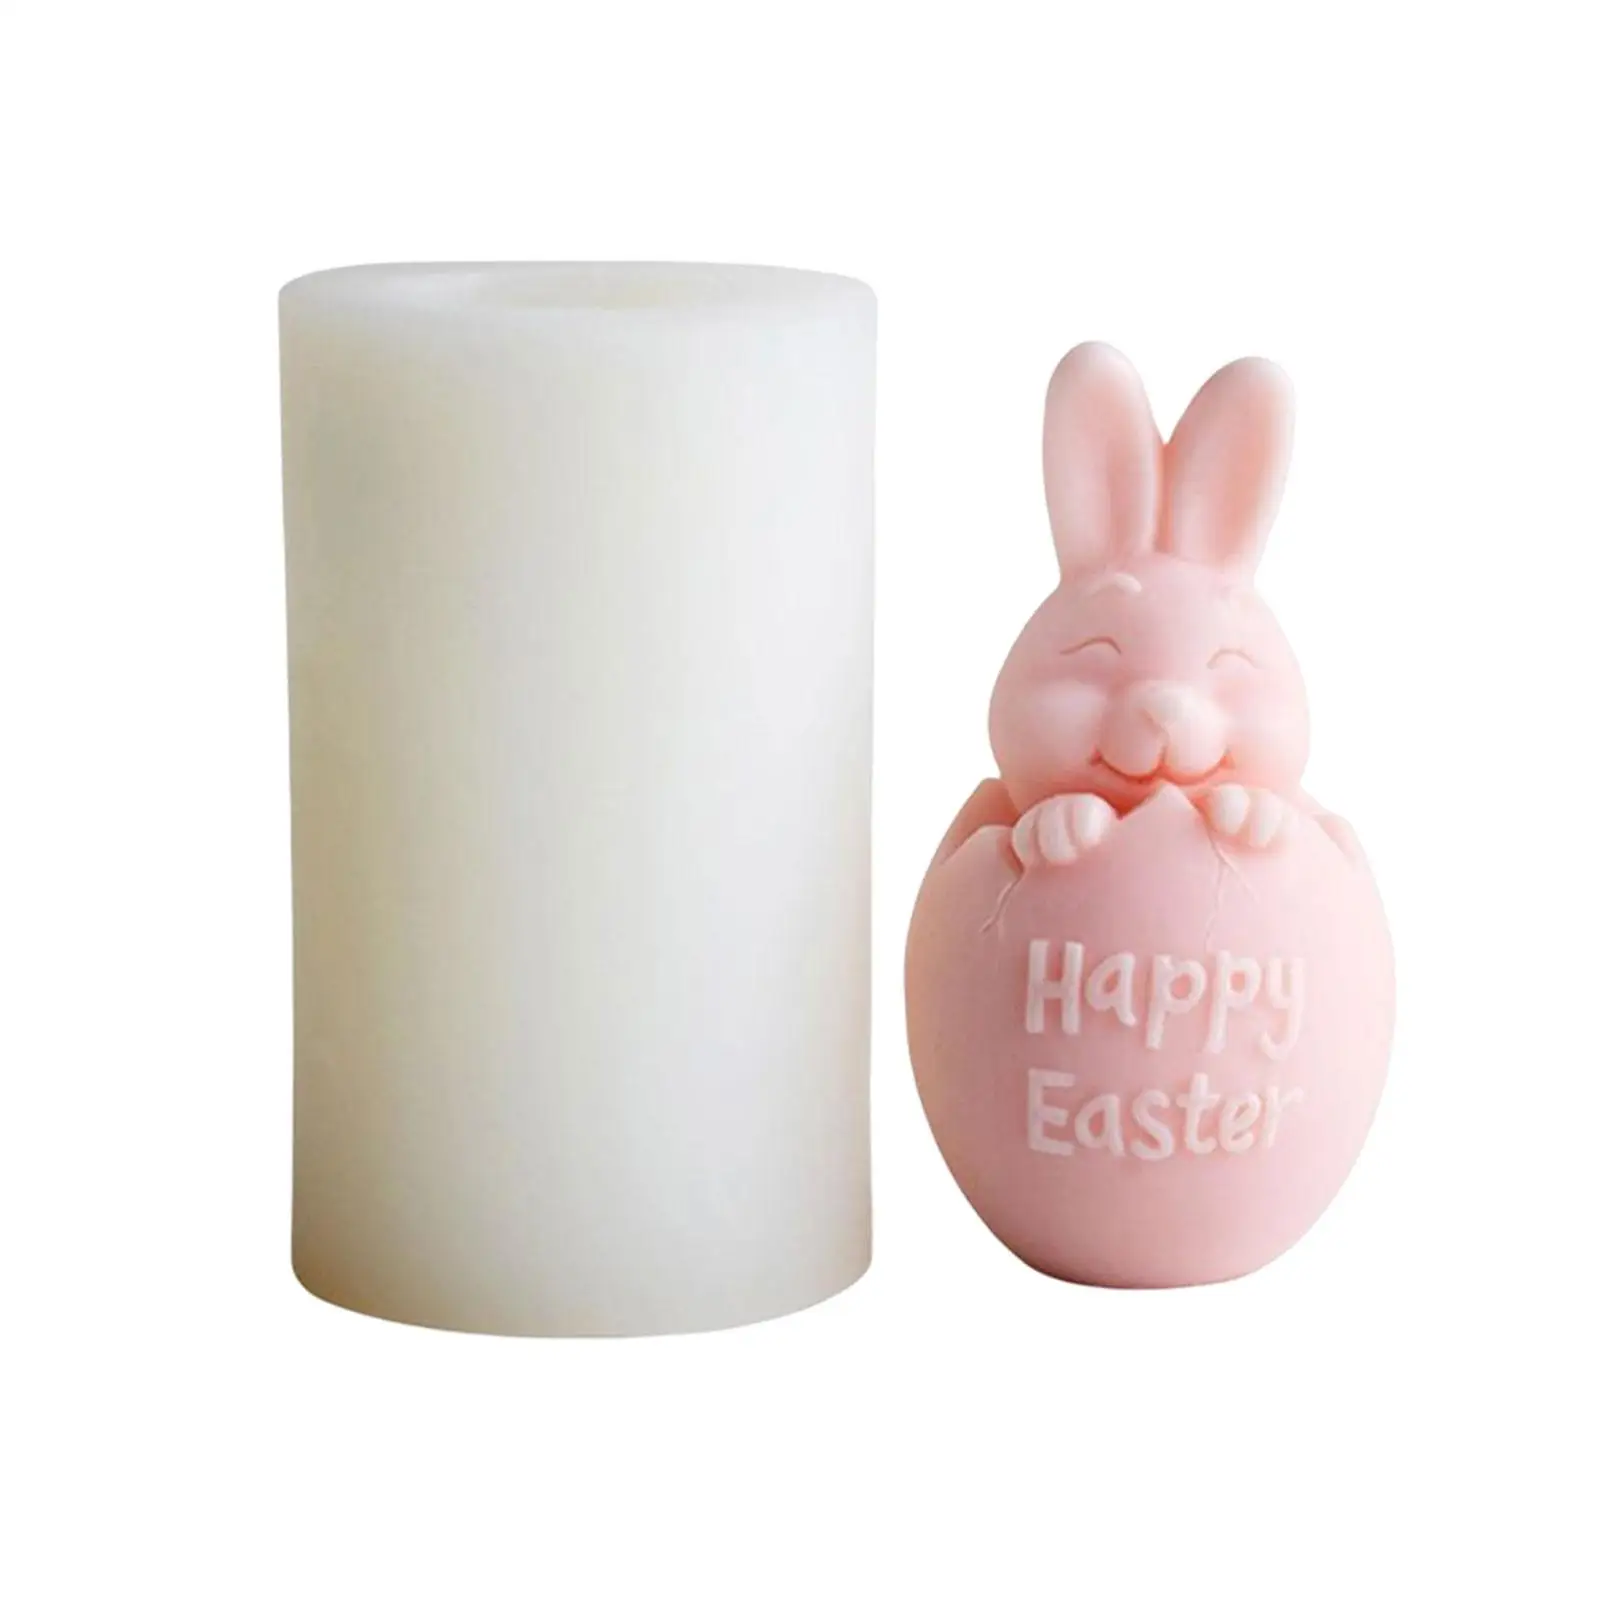 3D Rabbit Candle Silicone Model Resin Casting Making Polymer Clay Crafts DIY Candle Soap for Table Home Ornament Birthday Gift